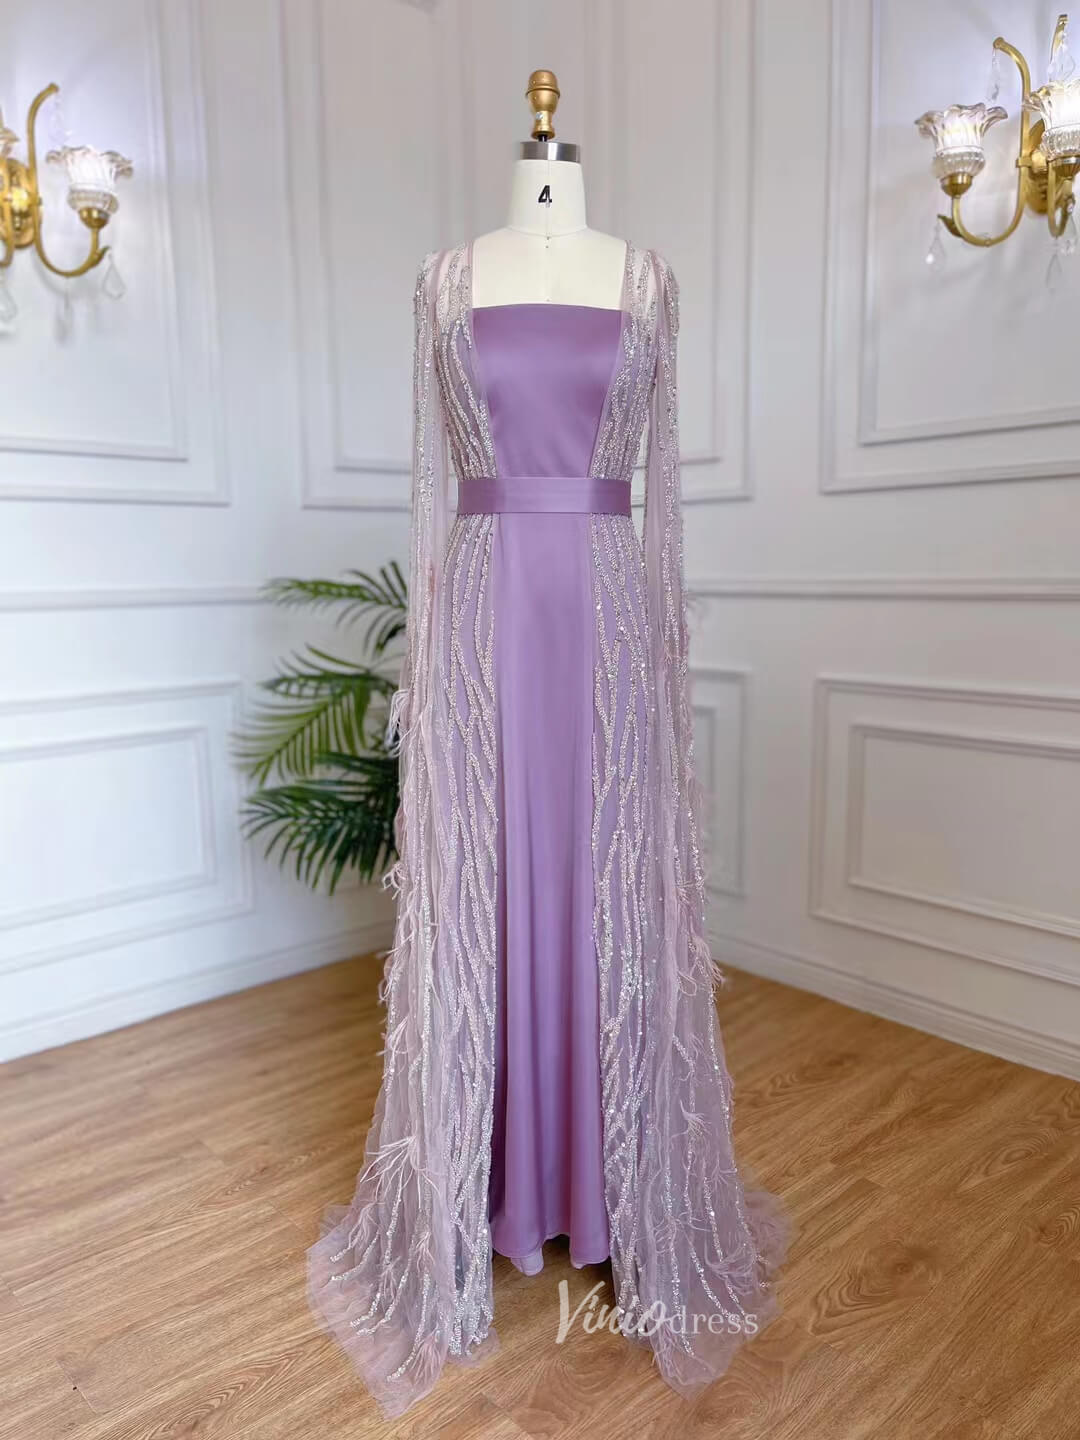 Lavender Beaded Convertible Evening Dresses Sheath Mother of the Bride Dress 20052-prom dresses-Viniodress-Lavender-US 2-Viniodress